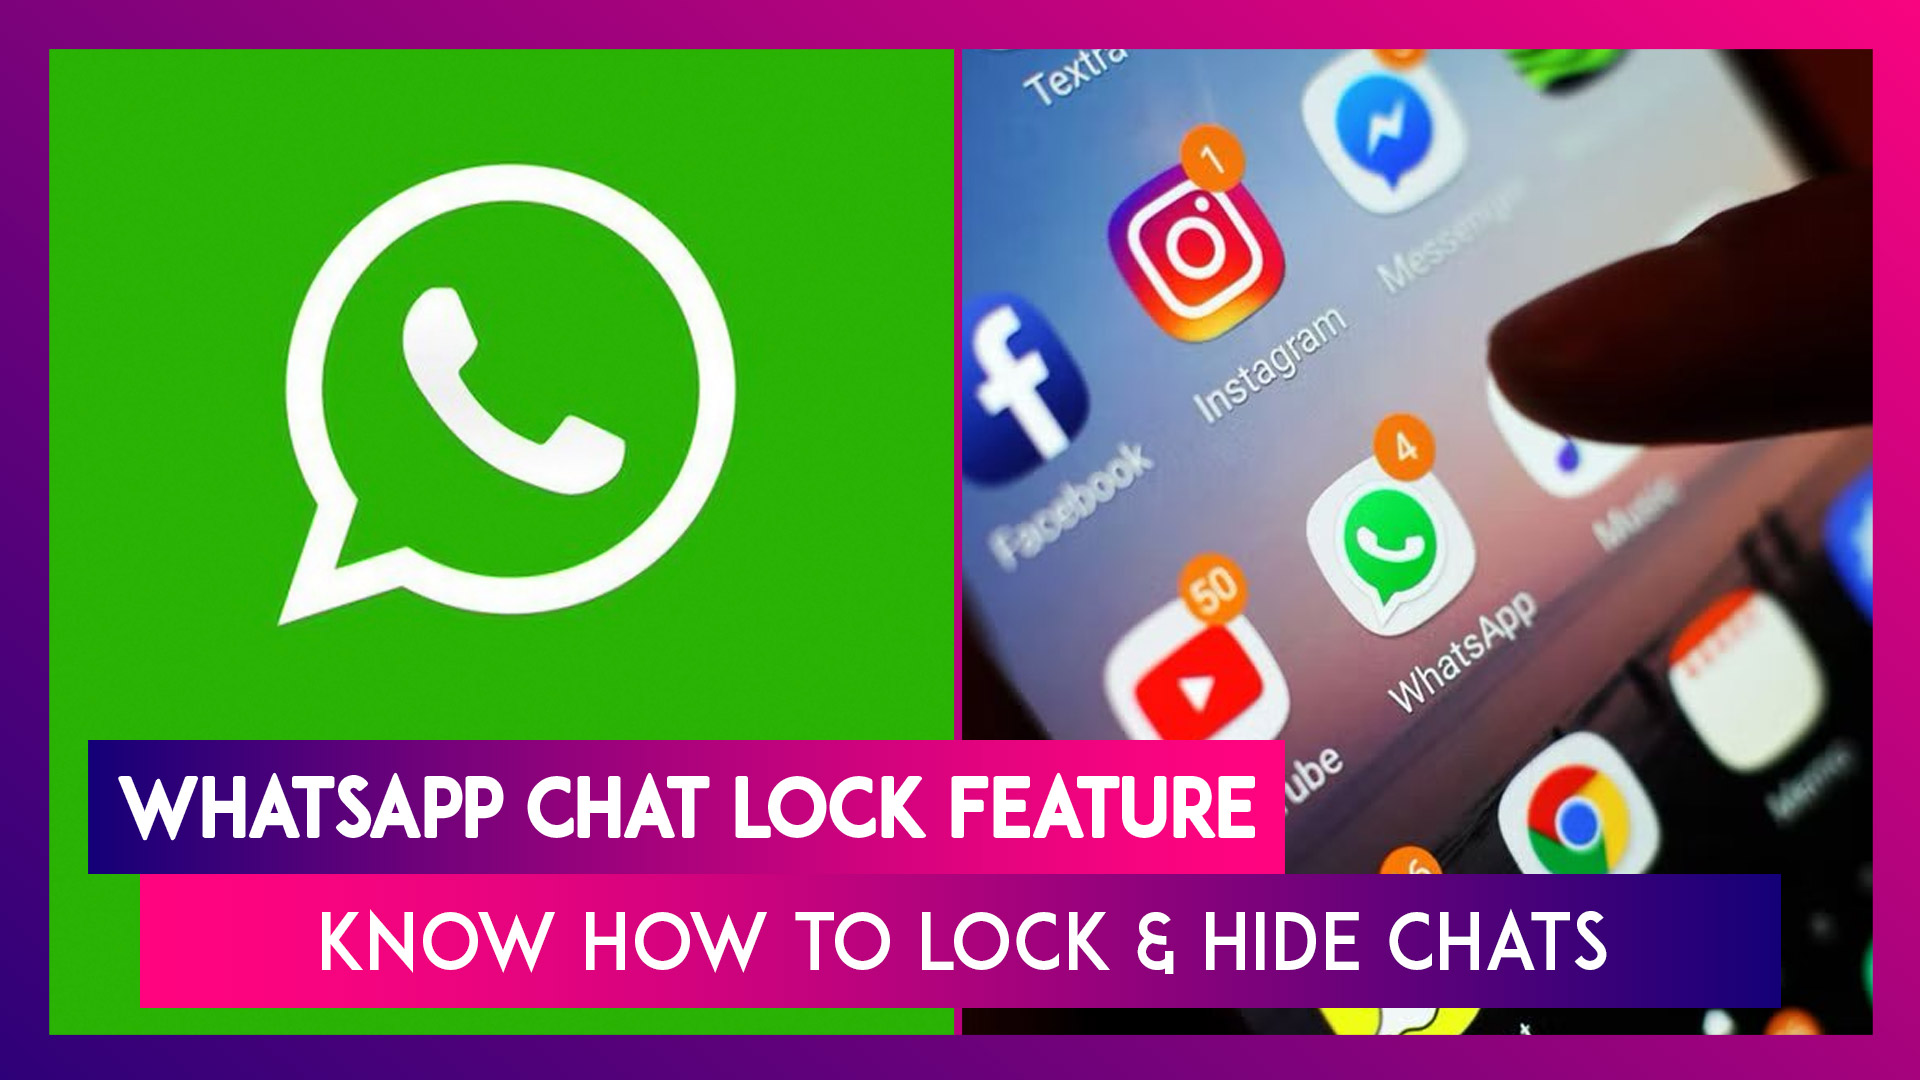 WhatsApp Chat Lock Feature: Know How To Lock And Hide Chats With Password Or Fingerprint ID